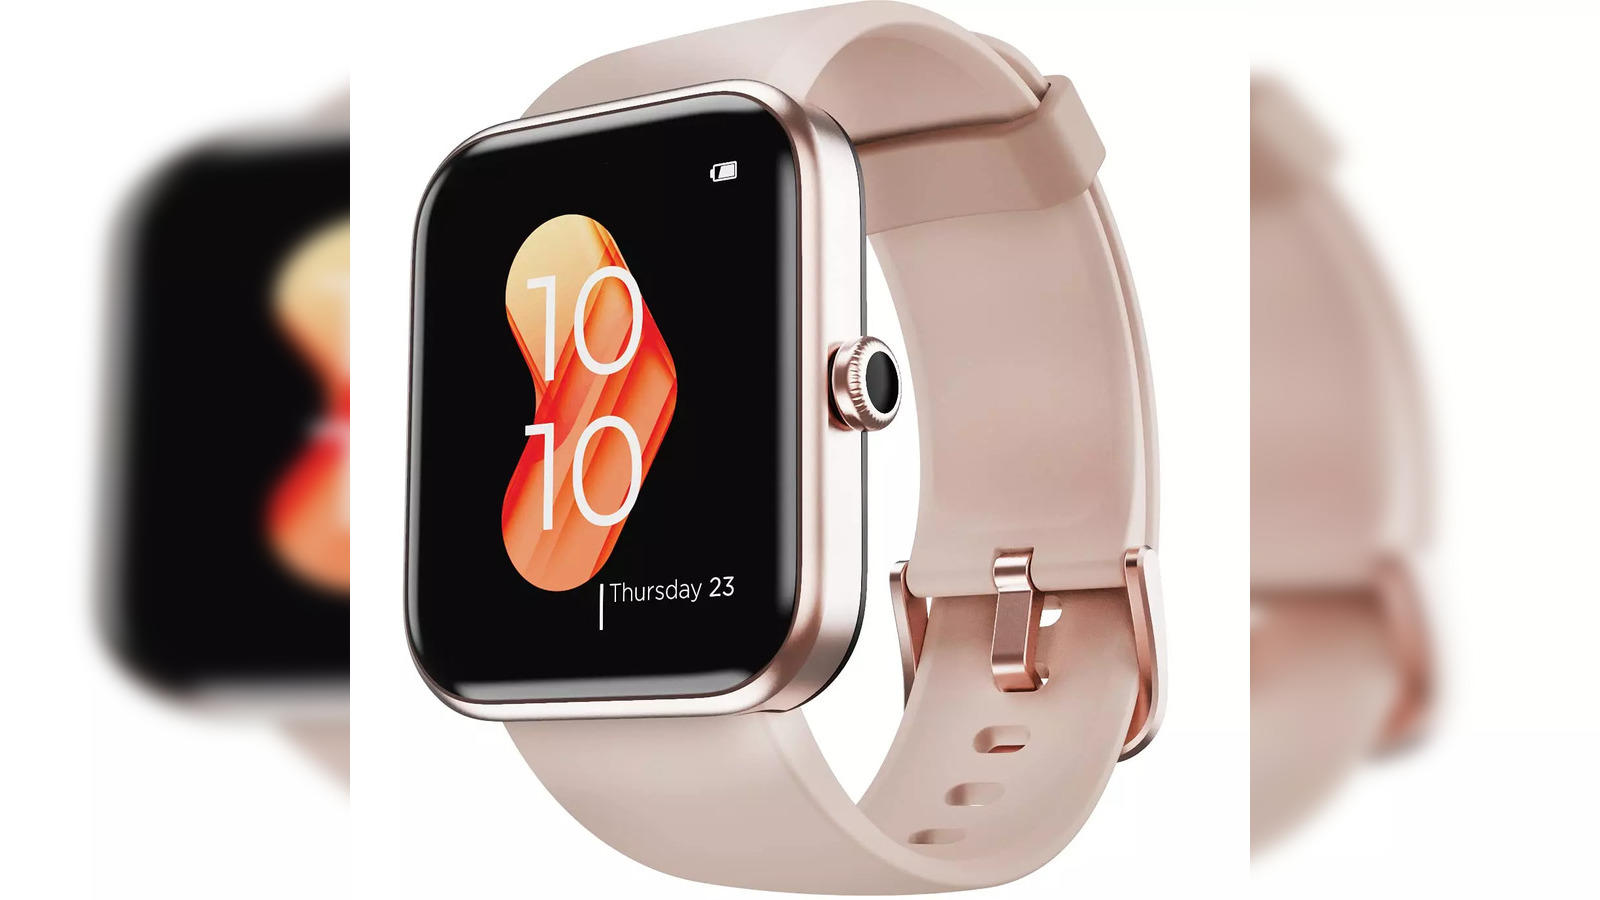 Potential Apple Watch Series 4 Features: Solid State Buttons and EKG  Functions, Making the Apple Watch More Water-Resistant, Durable and Useful  — Elf